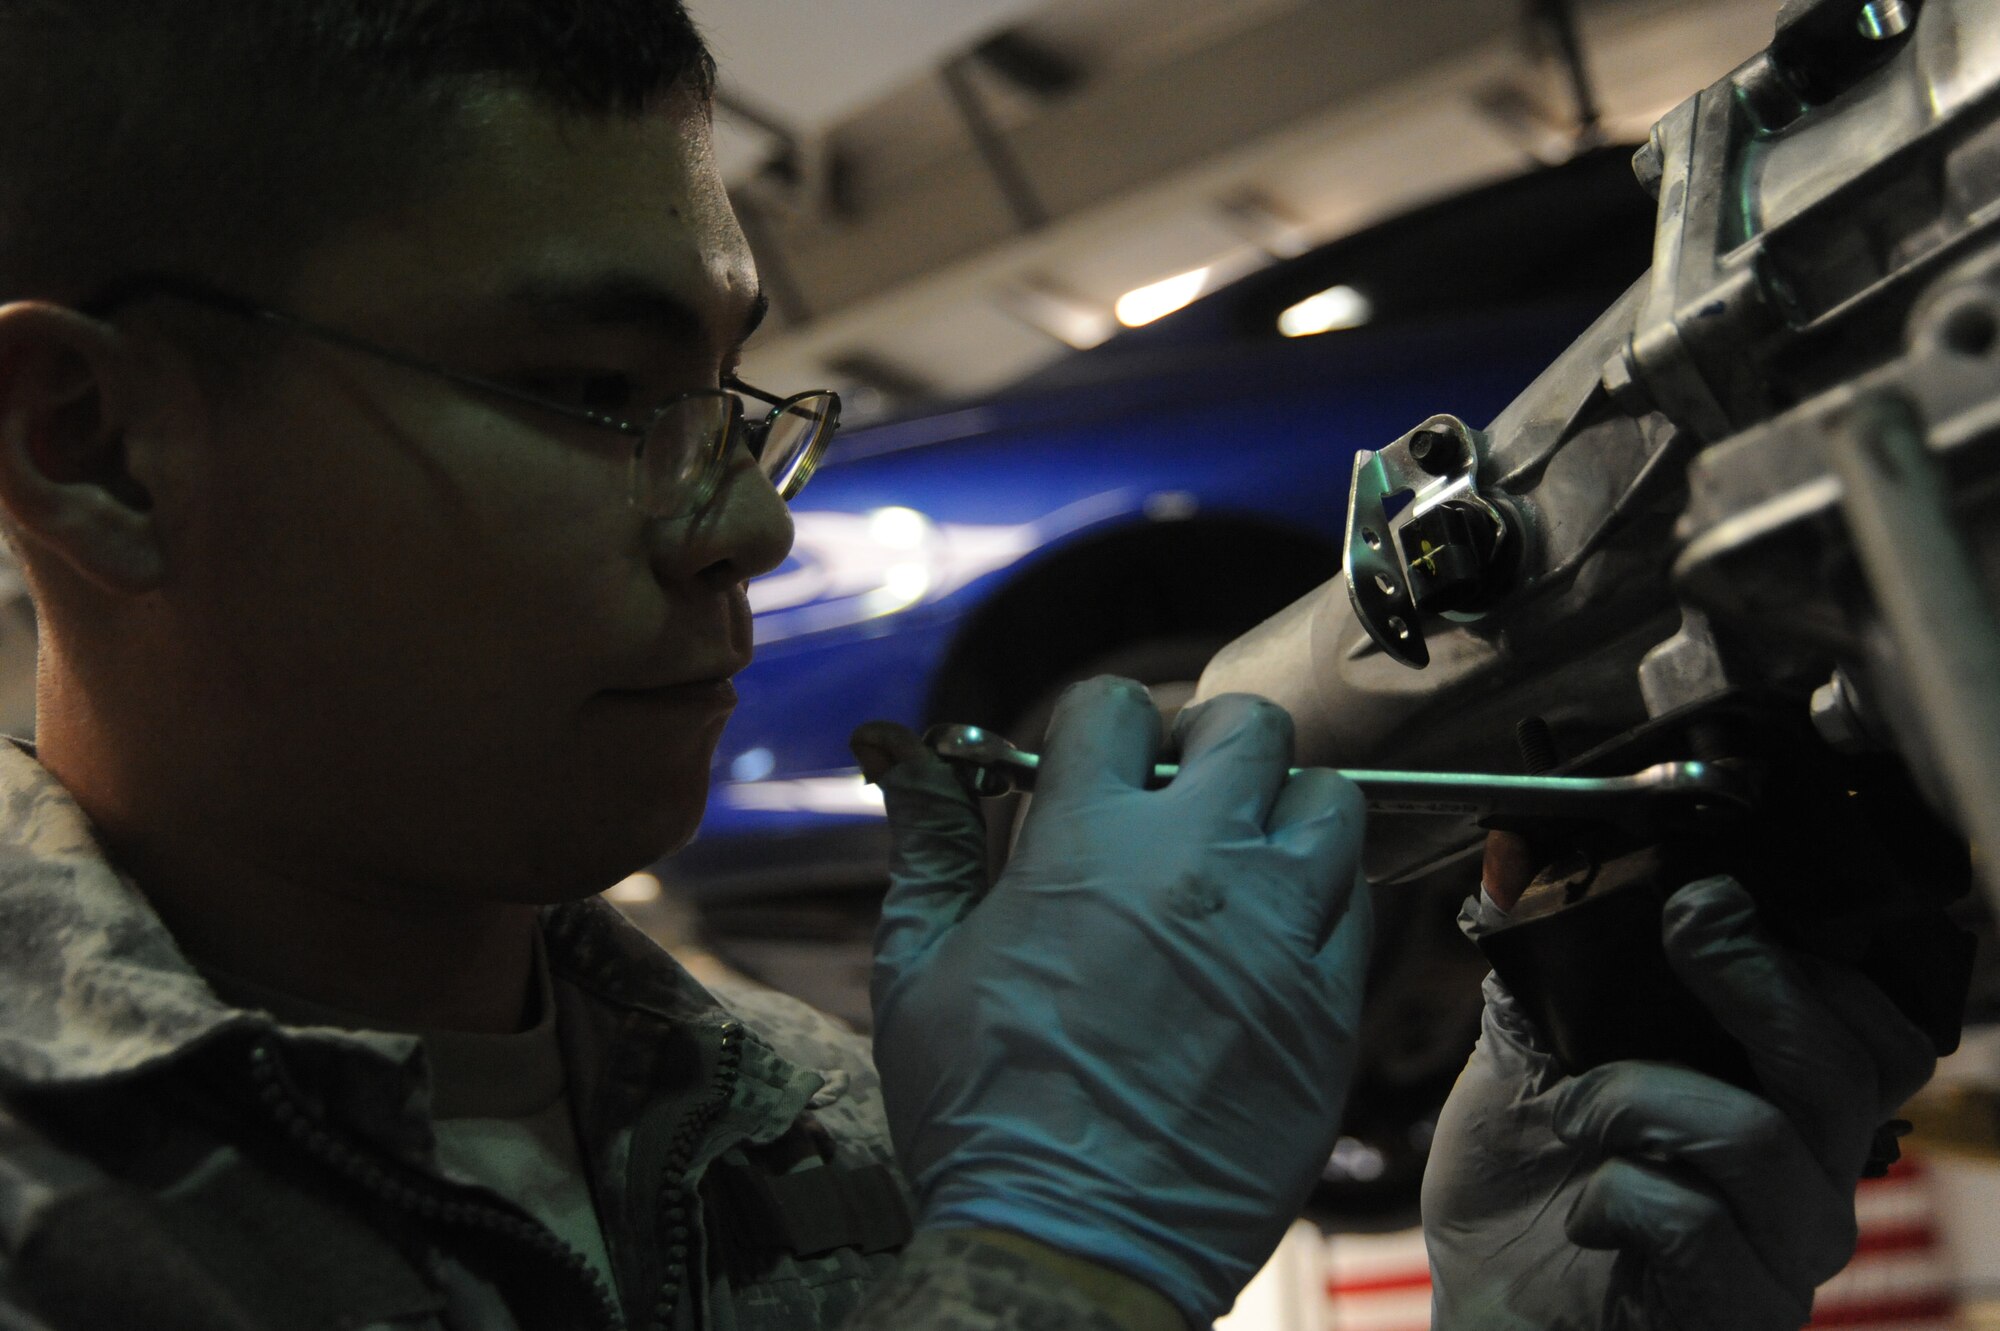 Senior Airman Michael Jakubec, 380th Expeditionary Logistics Readiness Squadron, vehicle maintenance, tightens a bolt for a mounting bracket on a new transmission for a Pontiac GTO, April 26 at an undisclosed location in Southwest Asia. The bracket will mount to the body of the vehicle for rear support. The GTO is used as a chase car to help guide the U-2 Dragon Lady pilots during take-offs and landings. Airman Jakubec is deployed from Kadena AB, Japan and hails from Spanaway Wash.  (U.S. Air Force photo by Senior Airman Brian J. Ellis) (Released)